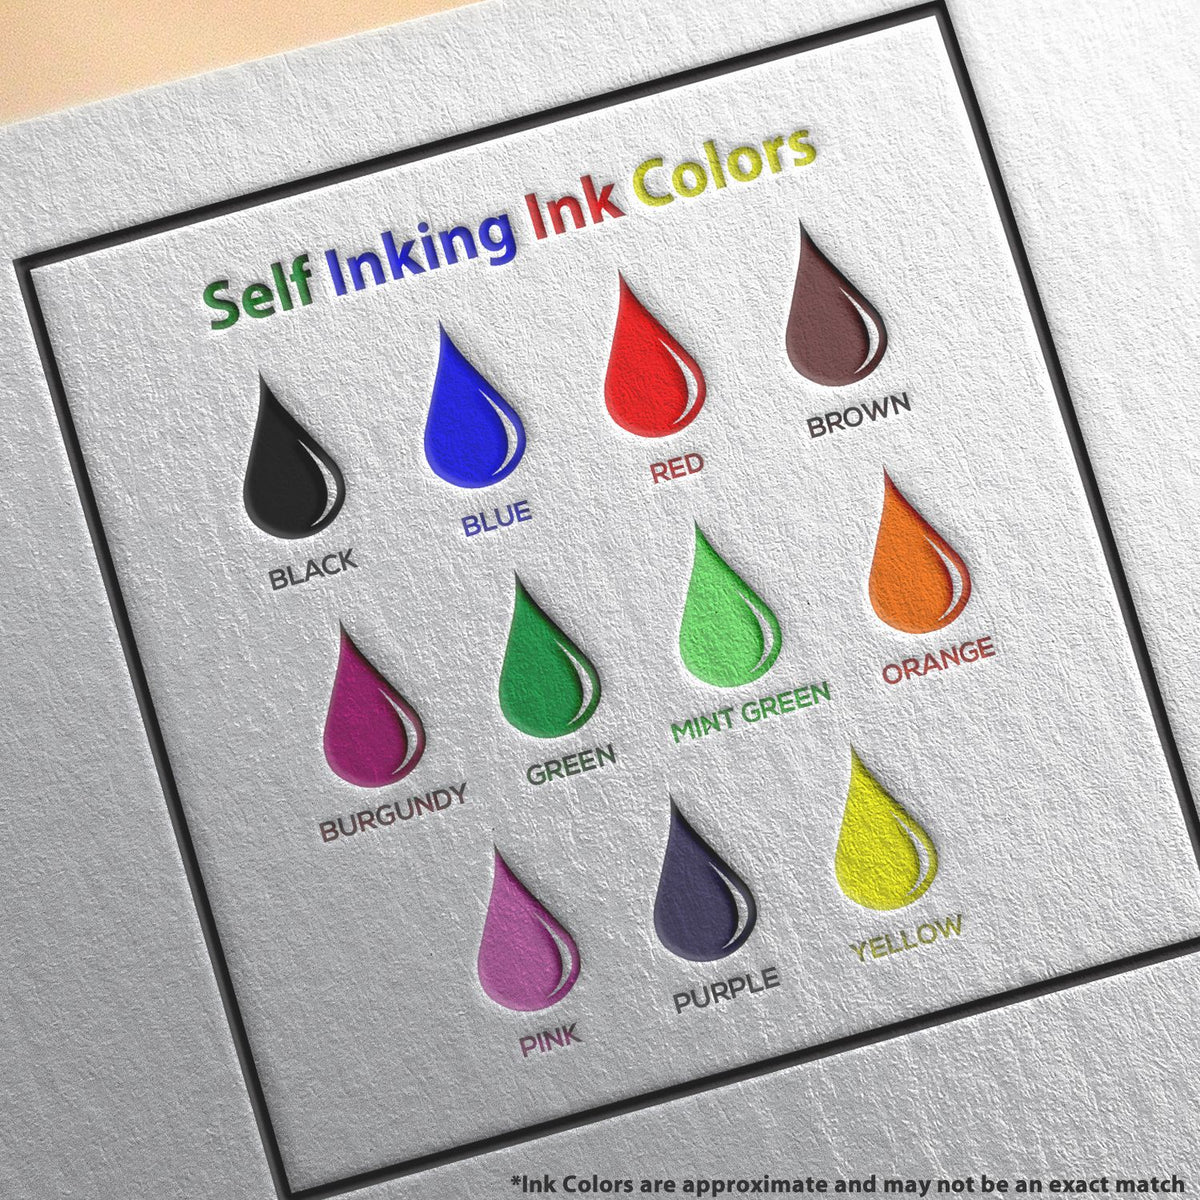 A picture showing the different ink colors or hues available for the Self-Inking Wisconsin PE Stamp product.